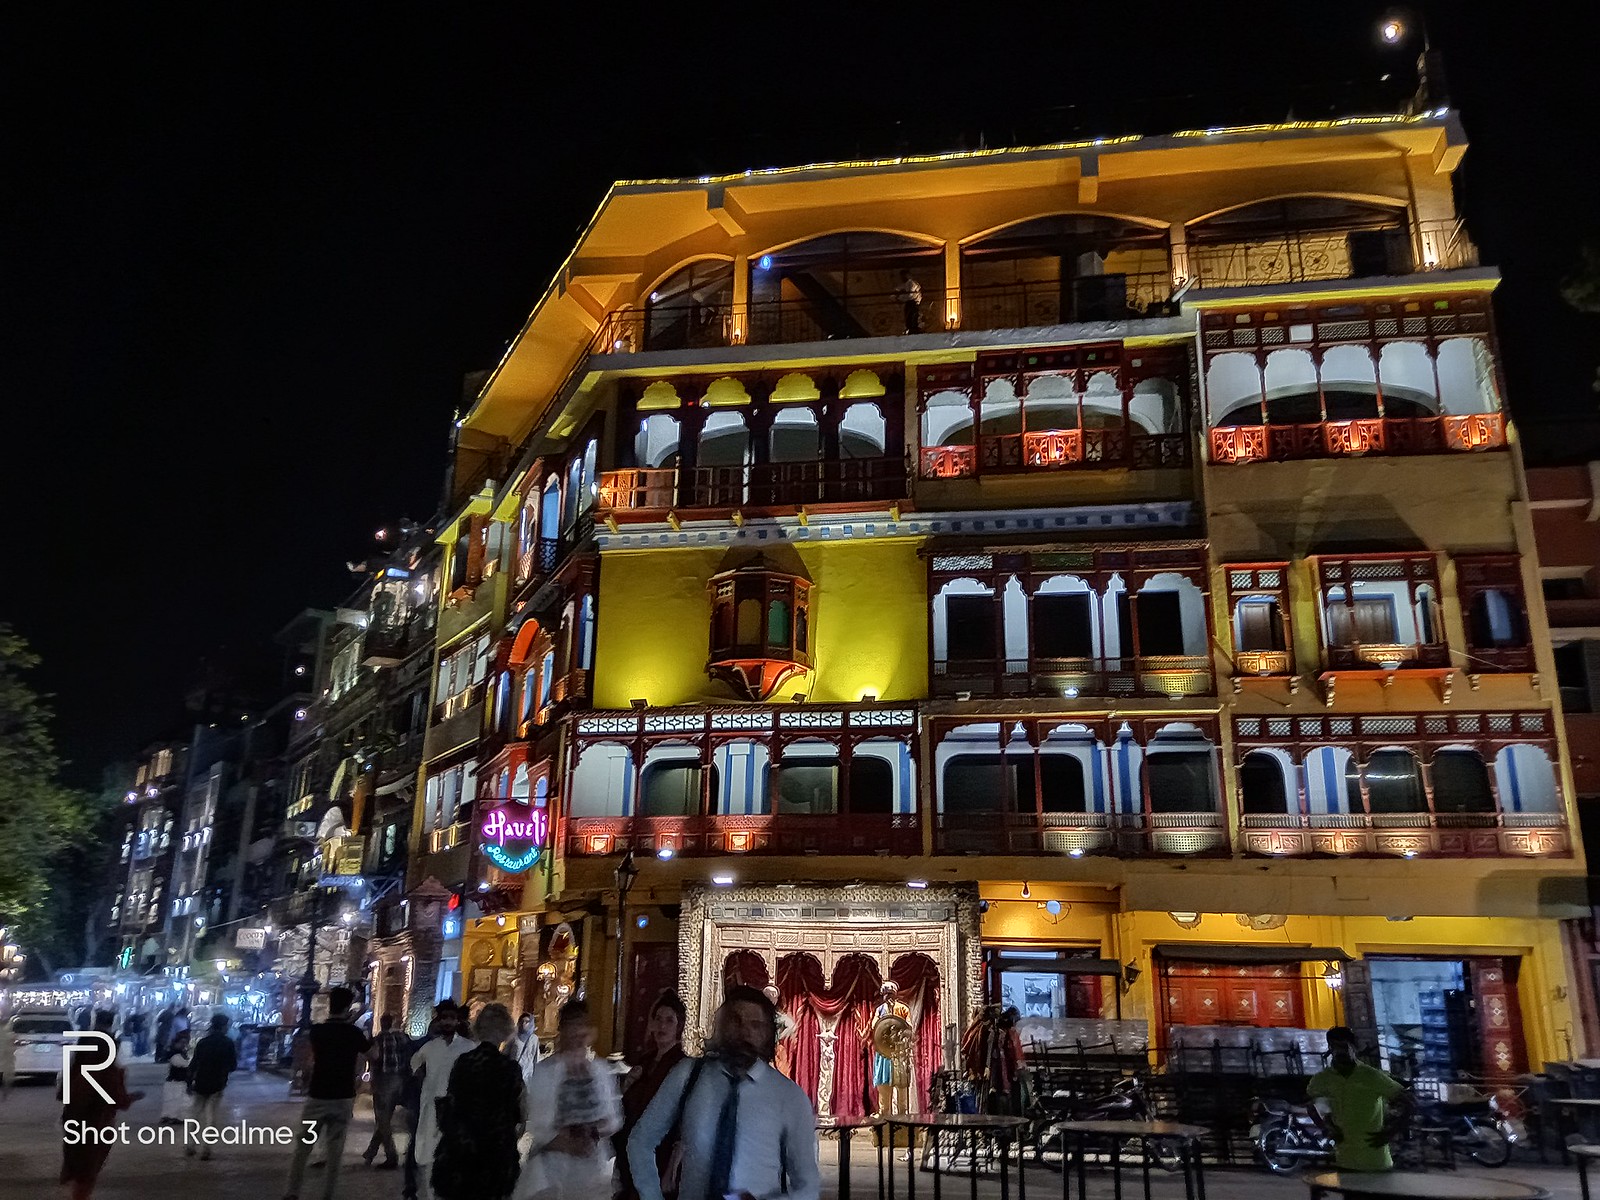 Building Picture at Night with Night Scape Mode on Realme 3